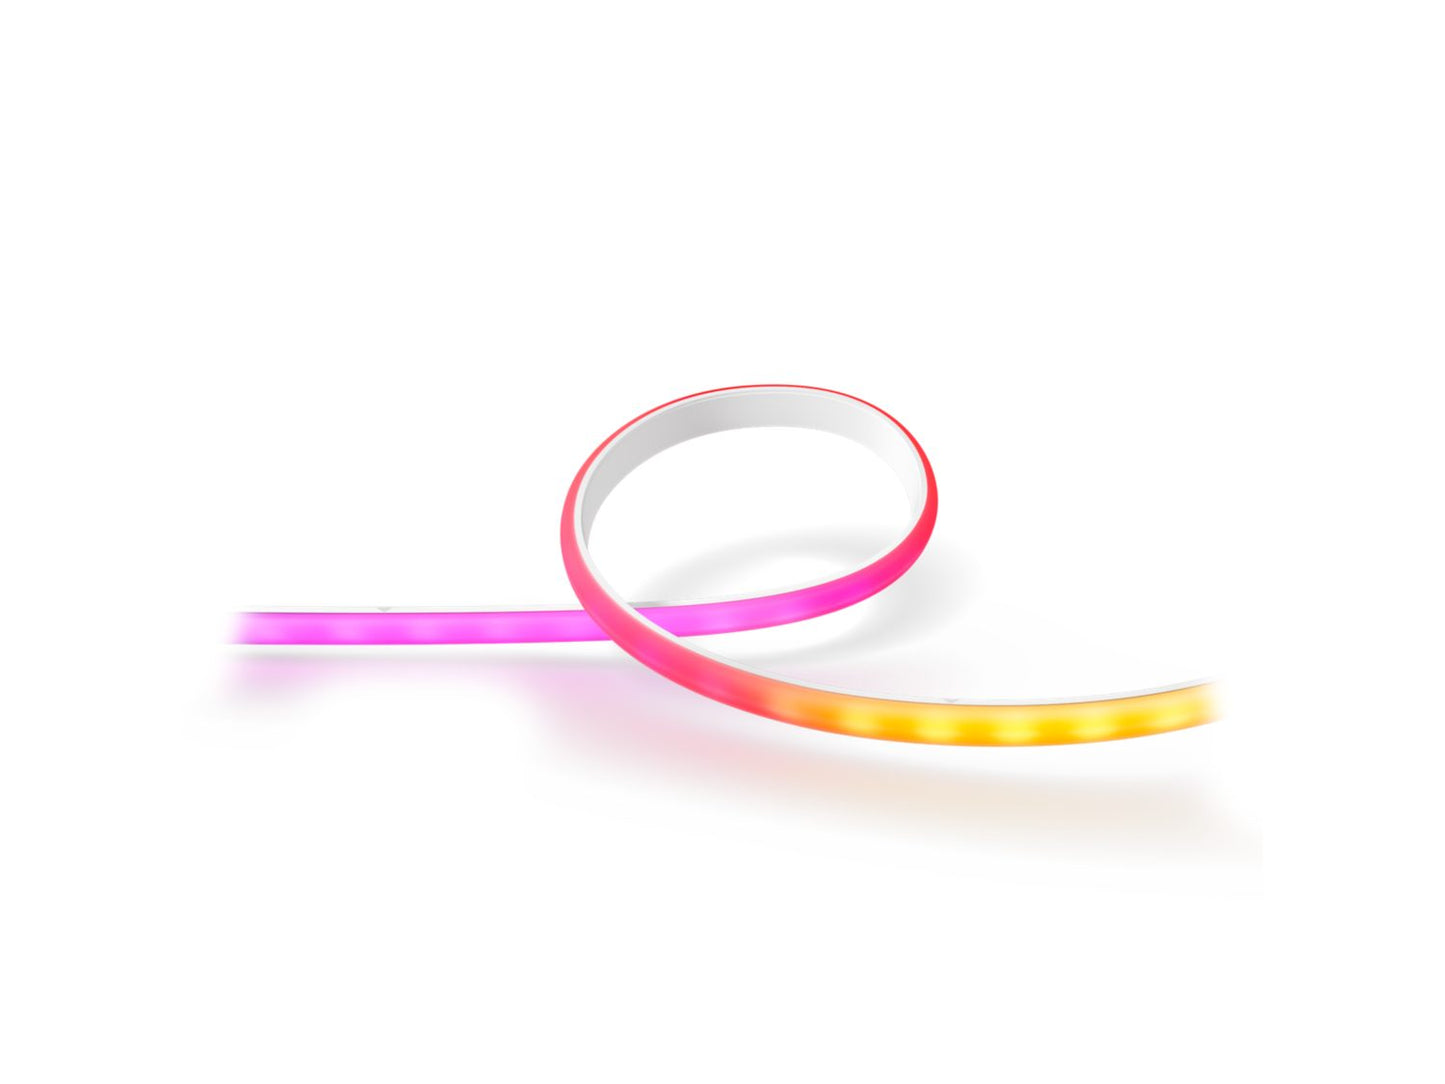 Philips Hue Gradient Ambiance Lightstrip - 1m Extension lit up